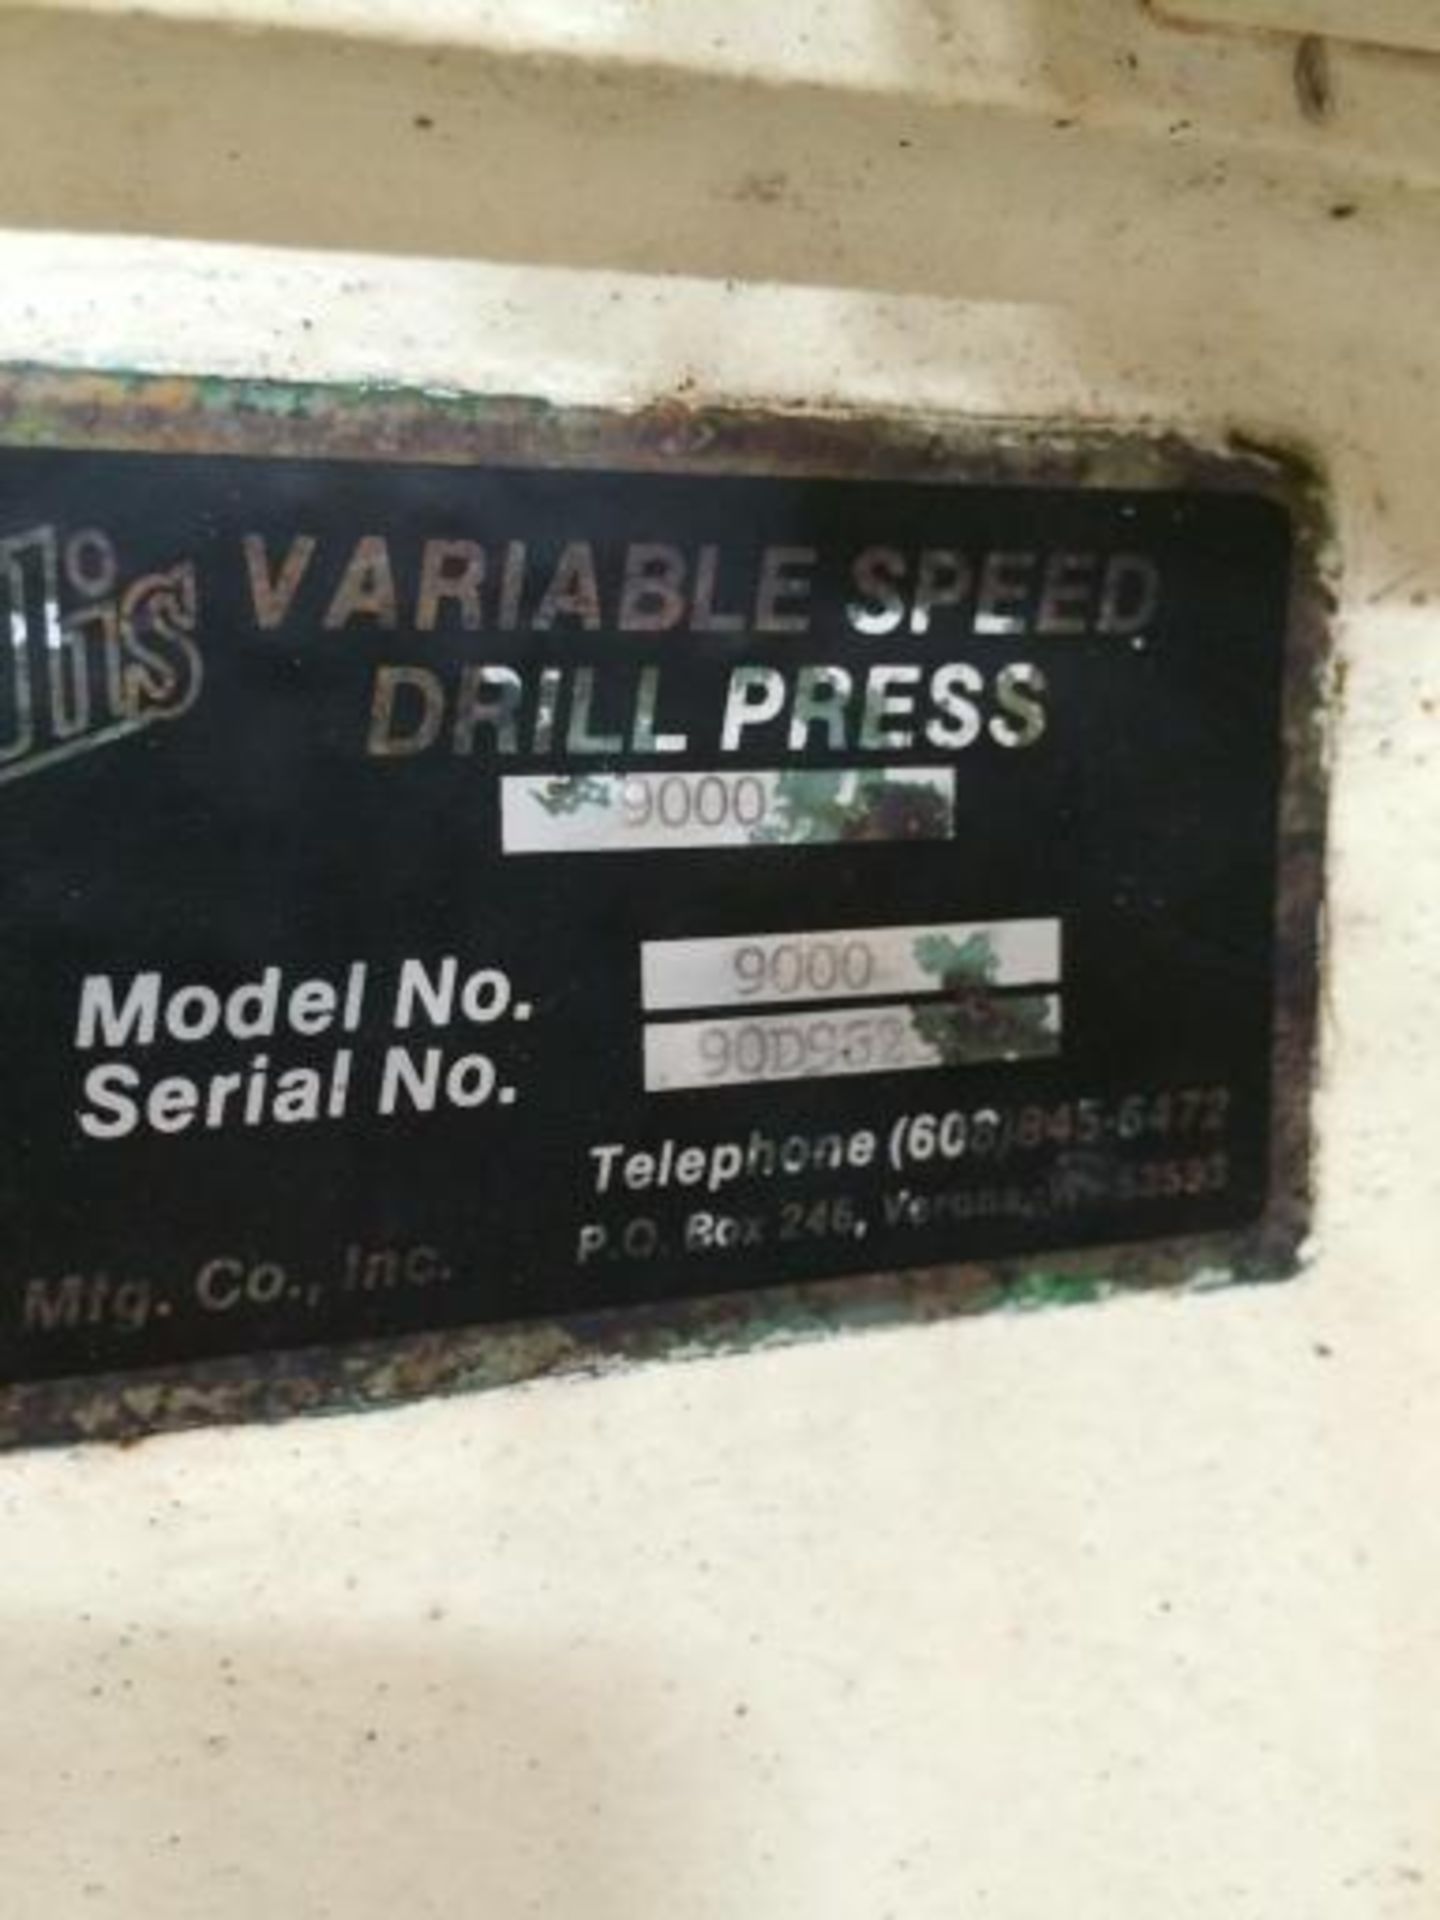 Model : 9000 ELLIS MODEL 9000 VARIABLE SPEED DRILL PRESS, 20" SPINDLE SPEEDS 0 - 1200 RPM DRILLS - Image 4 of 4